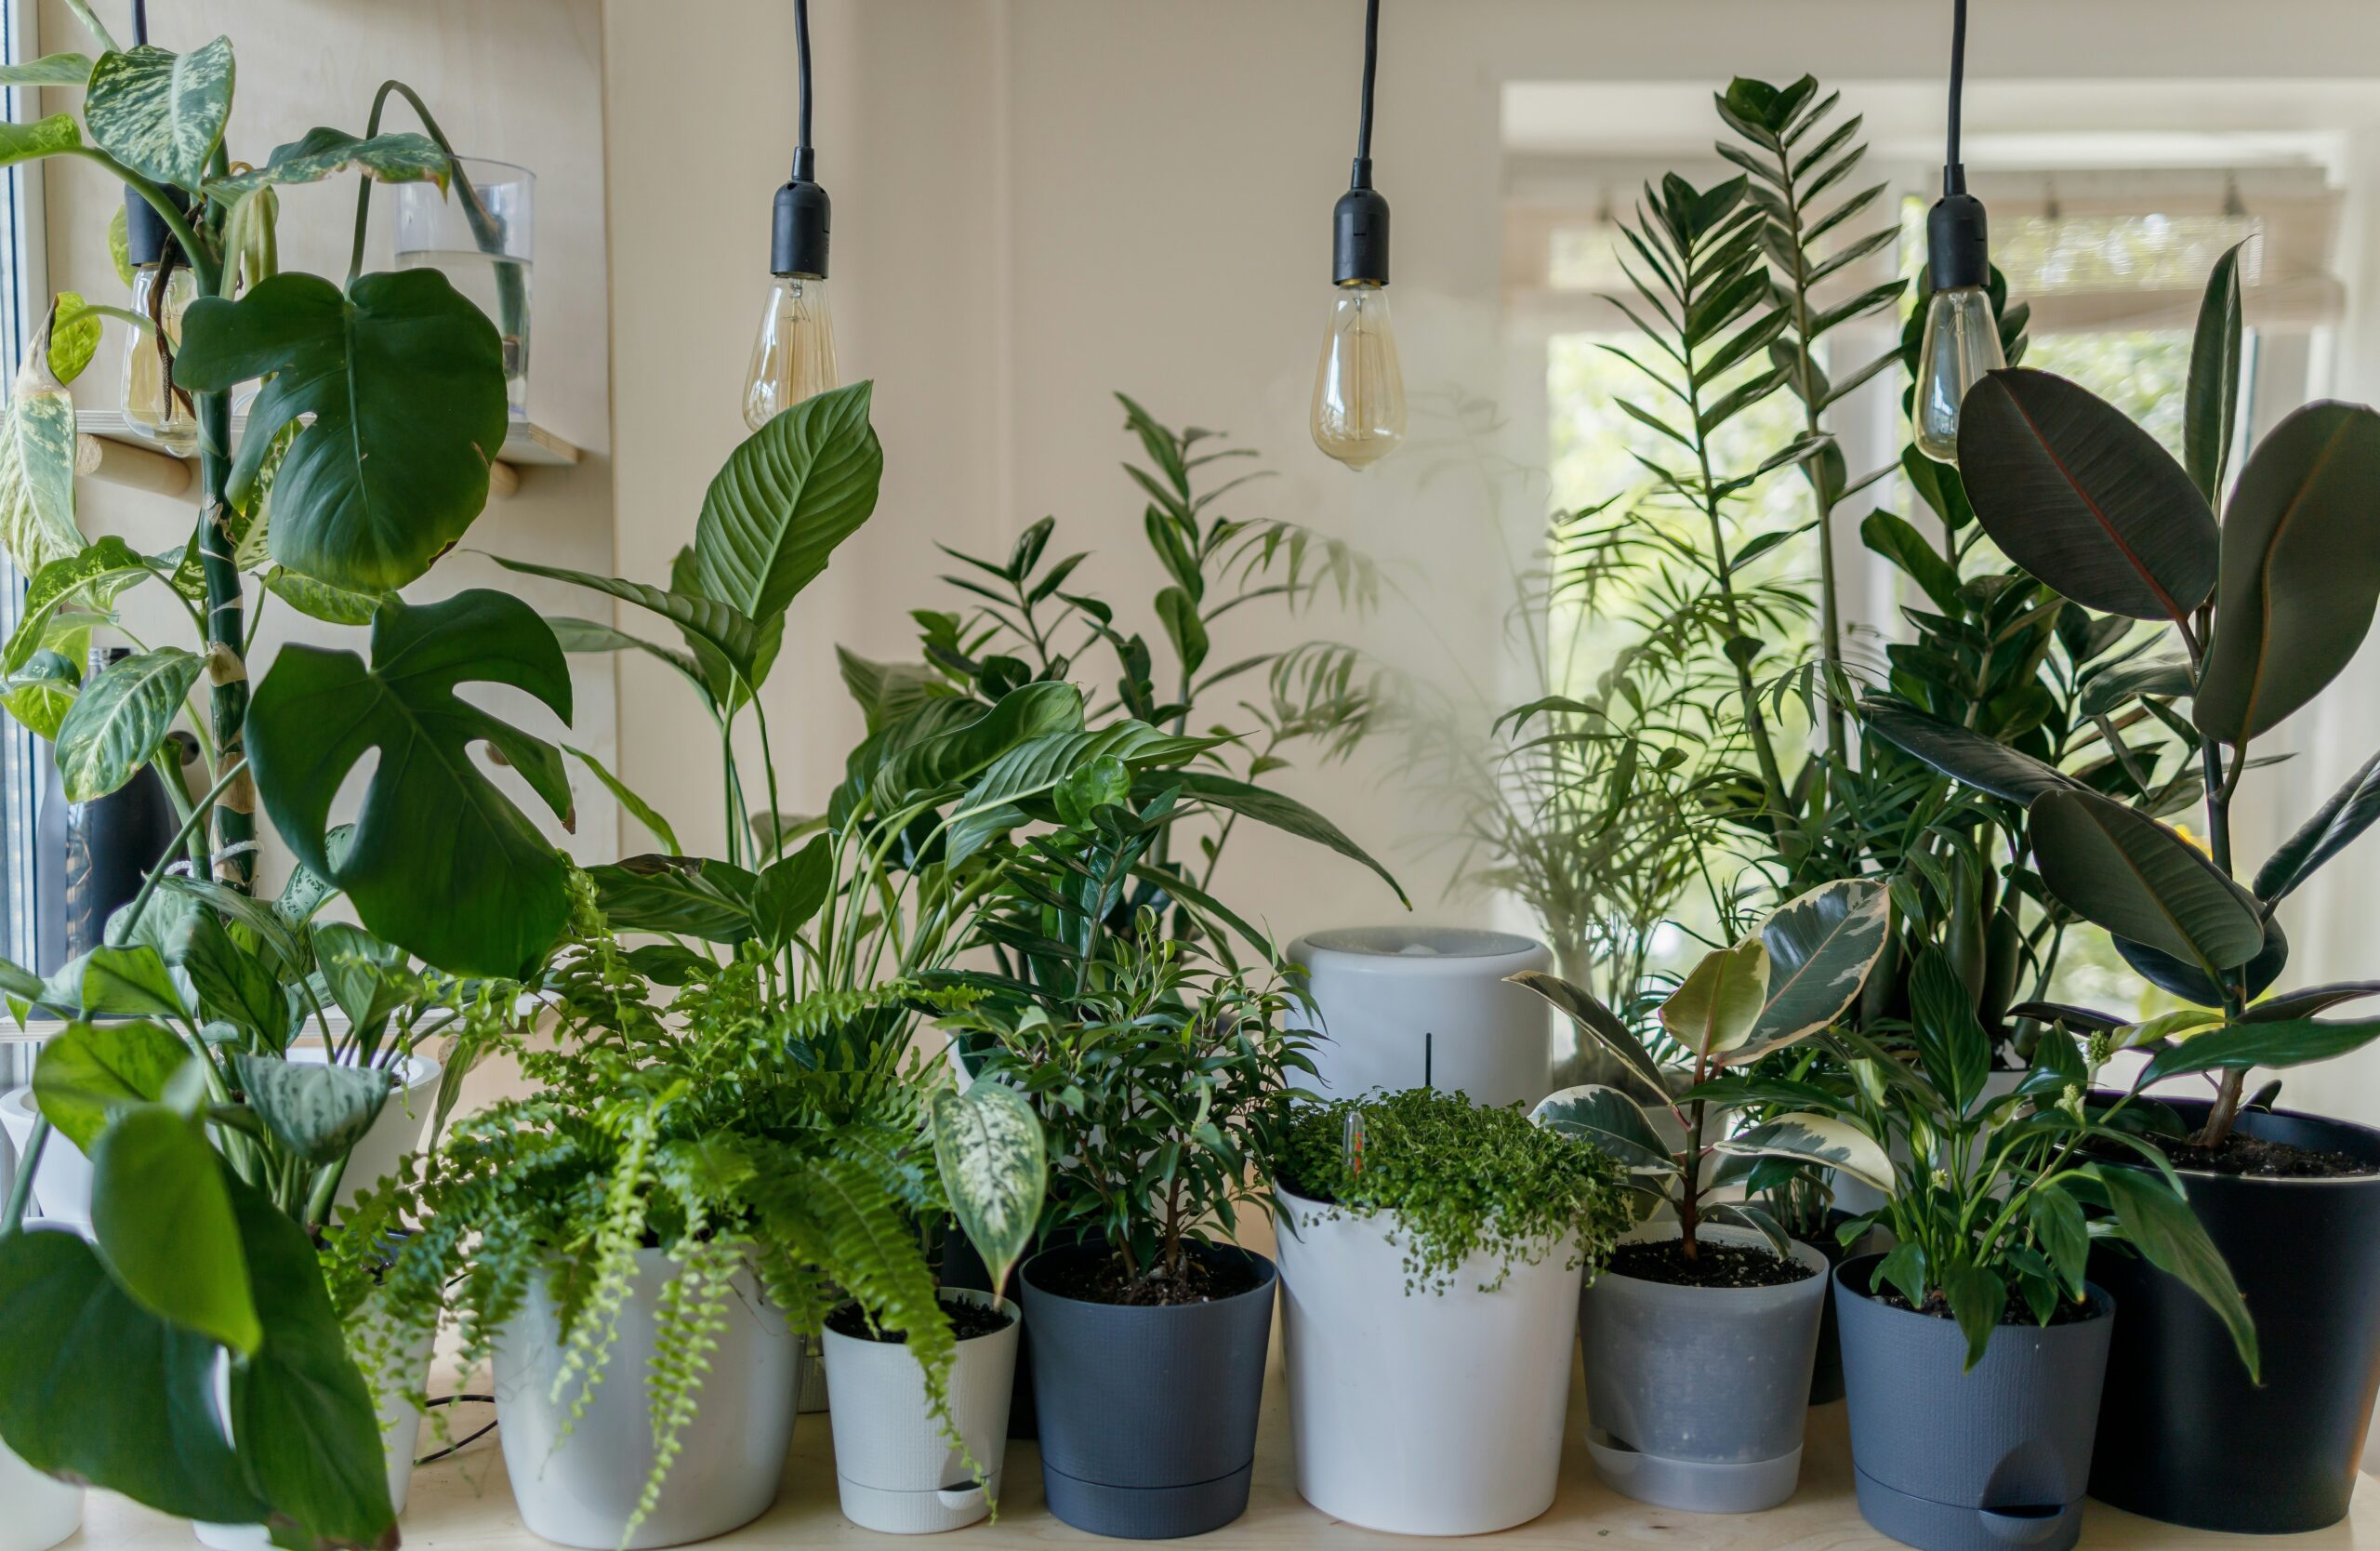 Use plants to incorporate a Scandinavian Interior design style in your home. Pictured: Plants